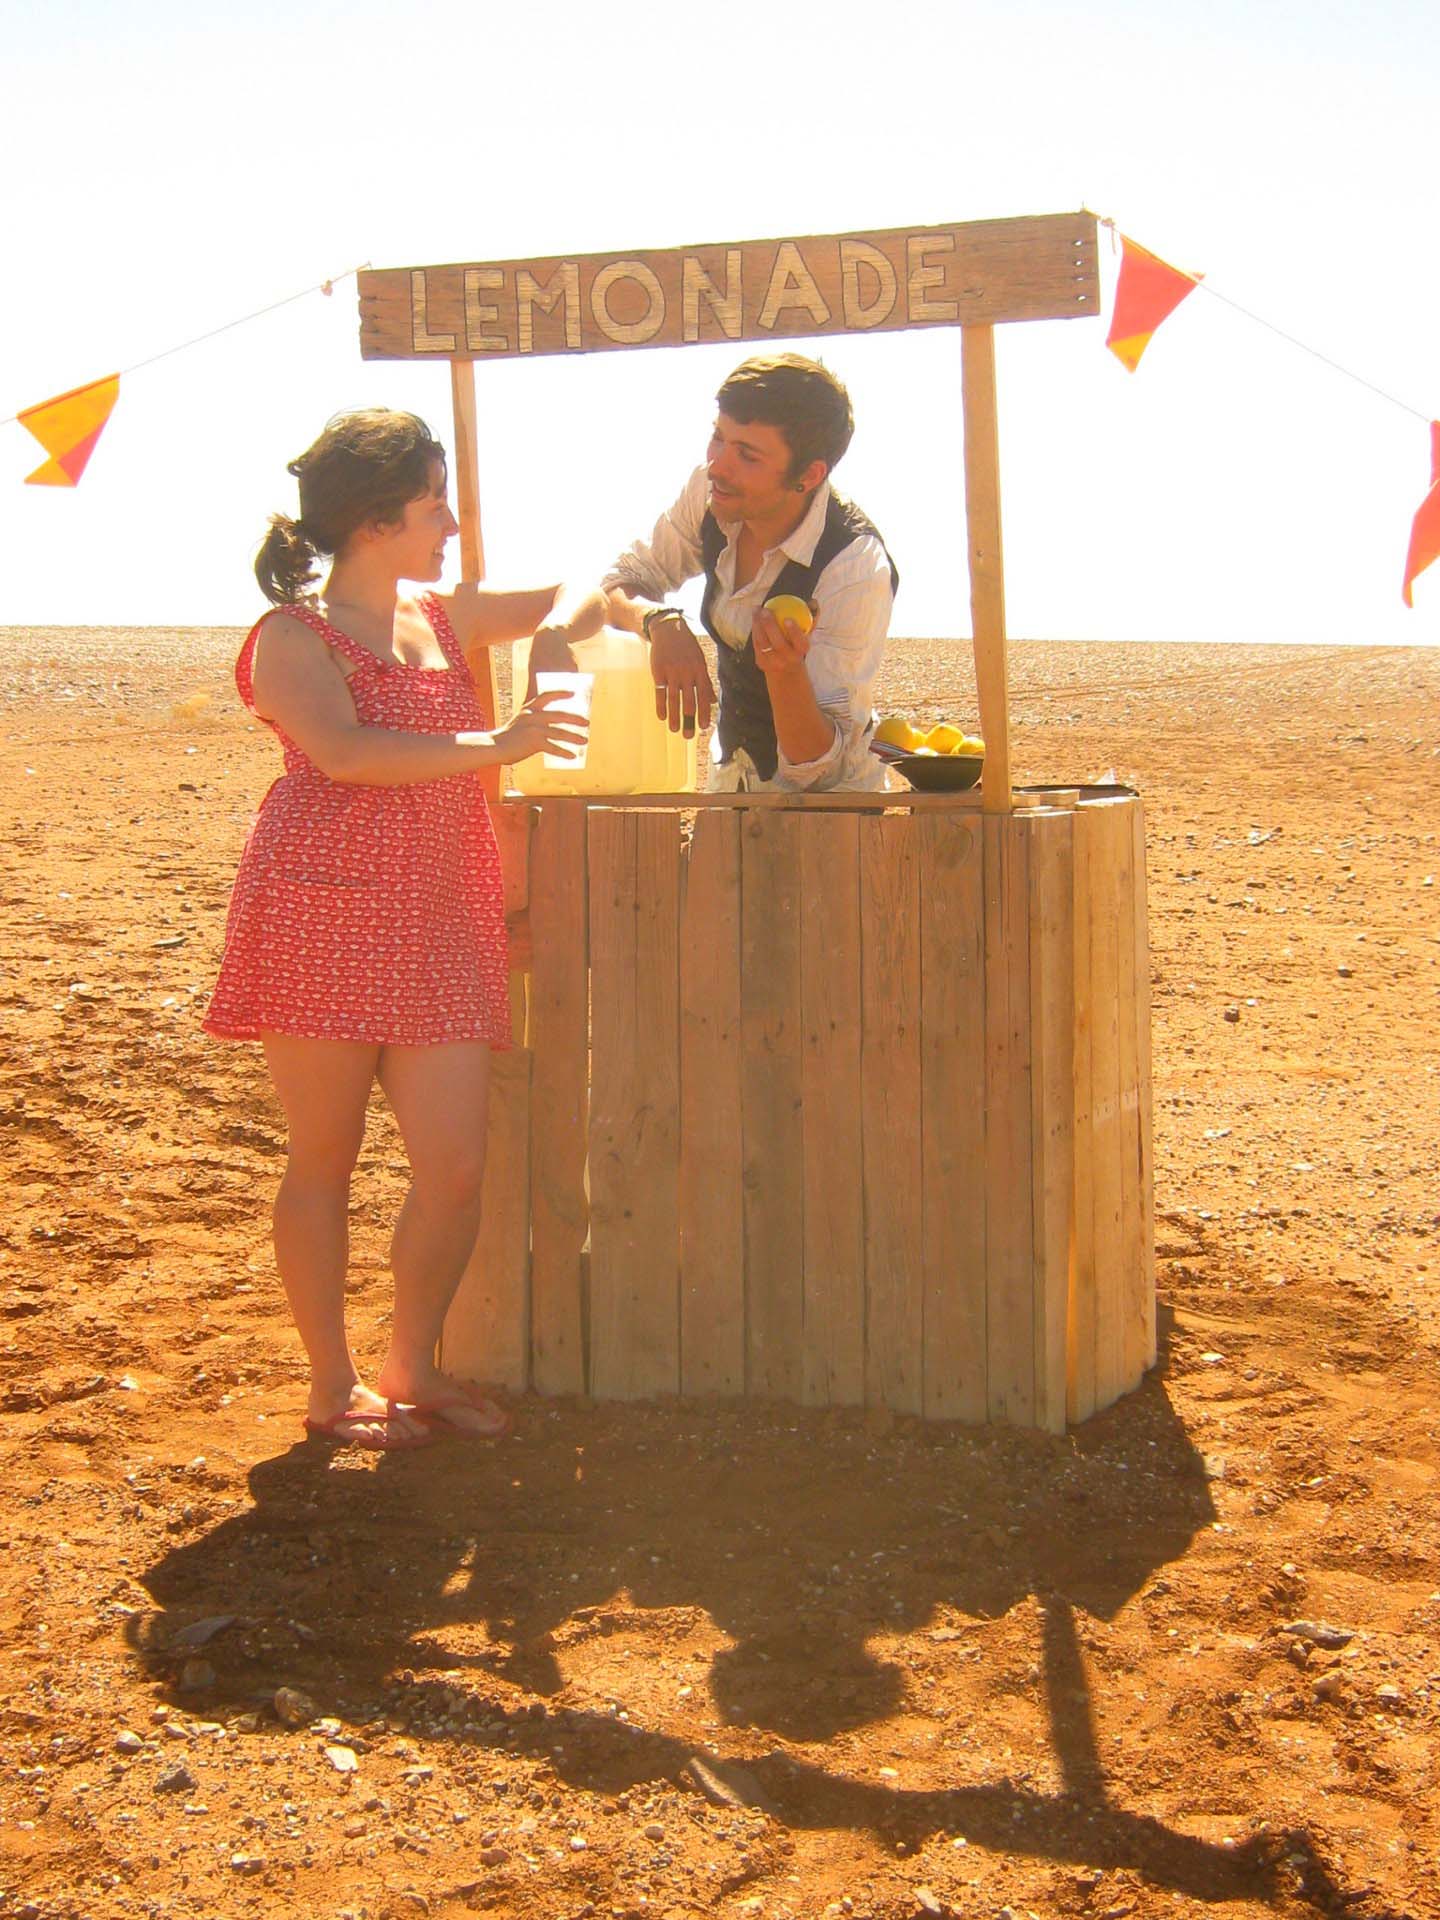 Two people at a wooden lemonade stand in a barren, reddish, rocky landscape